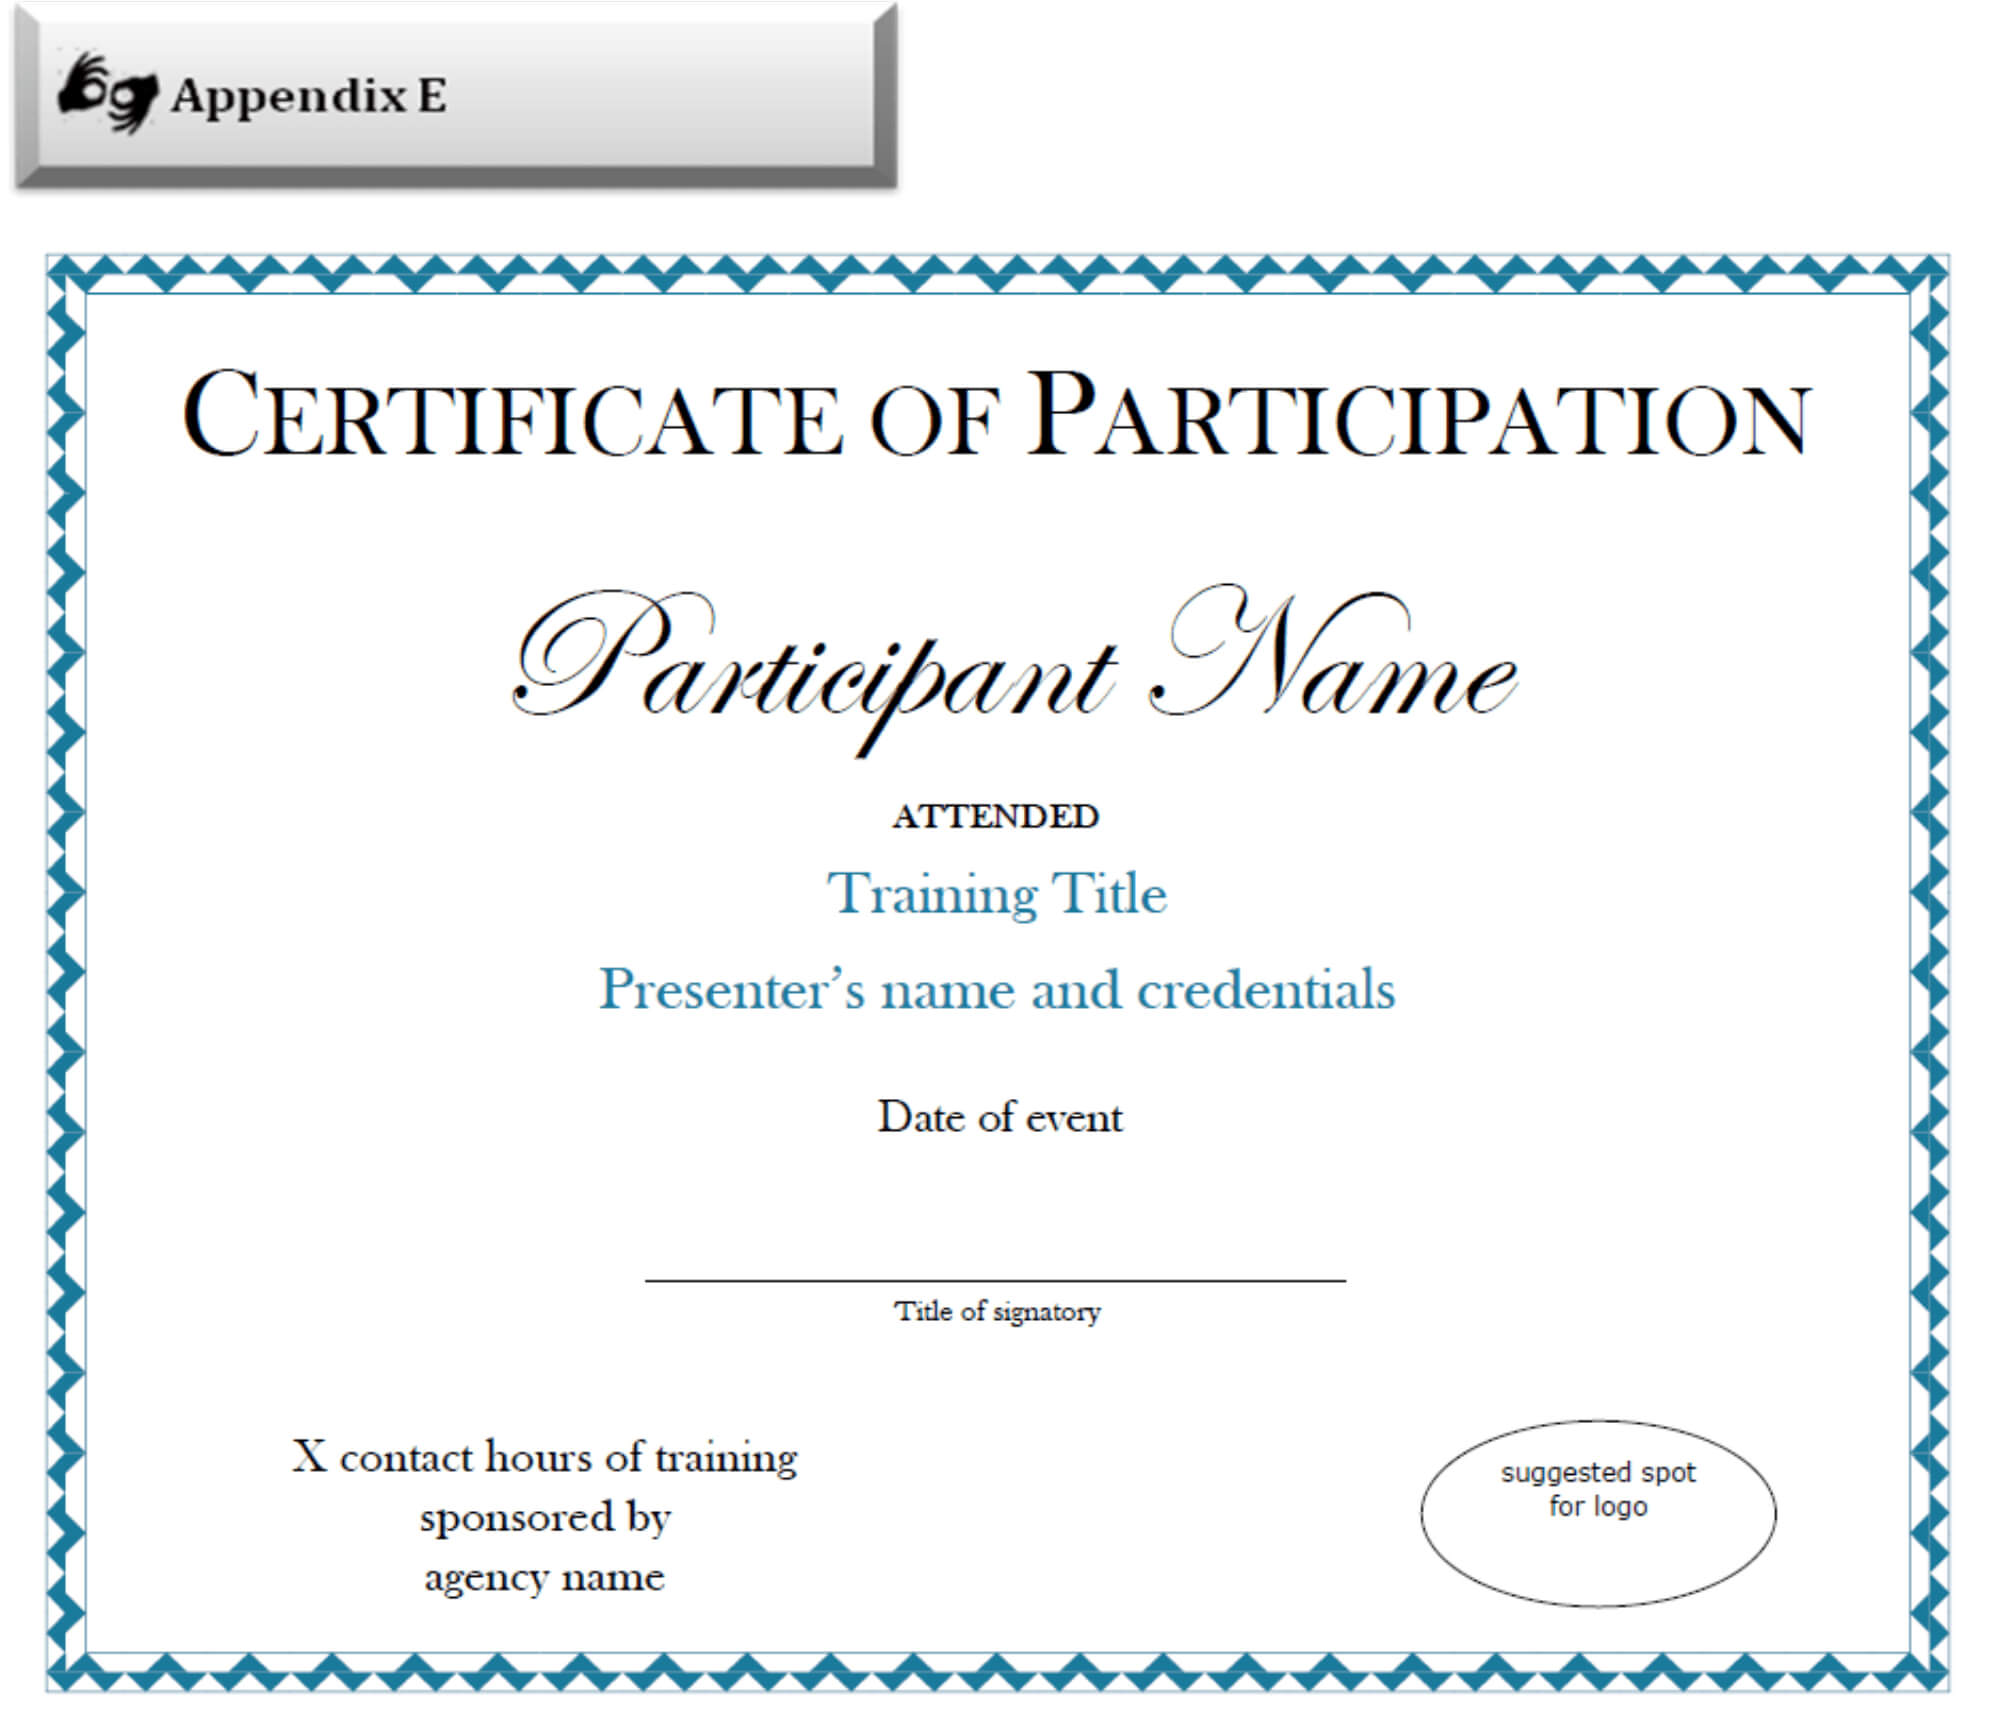 Participation Certificate Template Free Download | Sample In Participation Certificate Templates Free Download